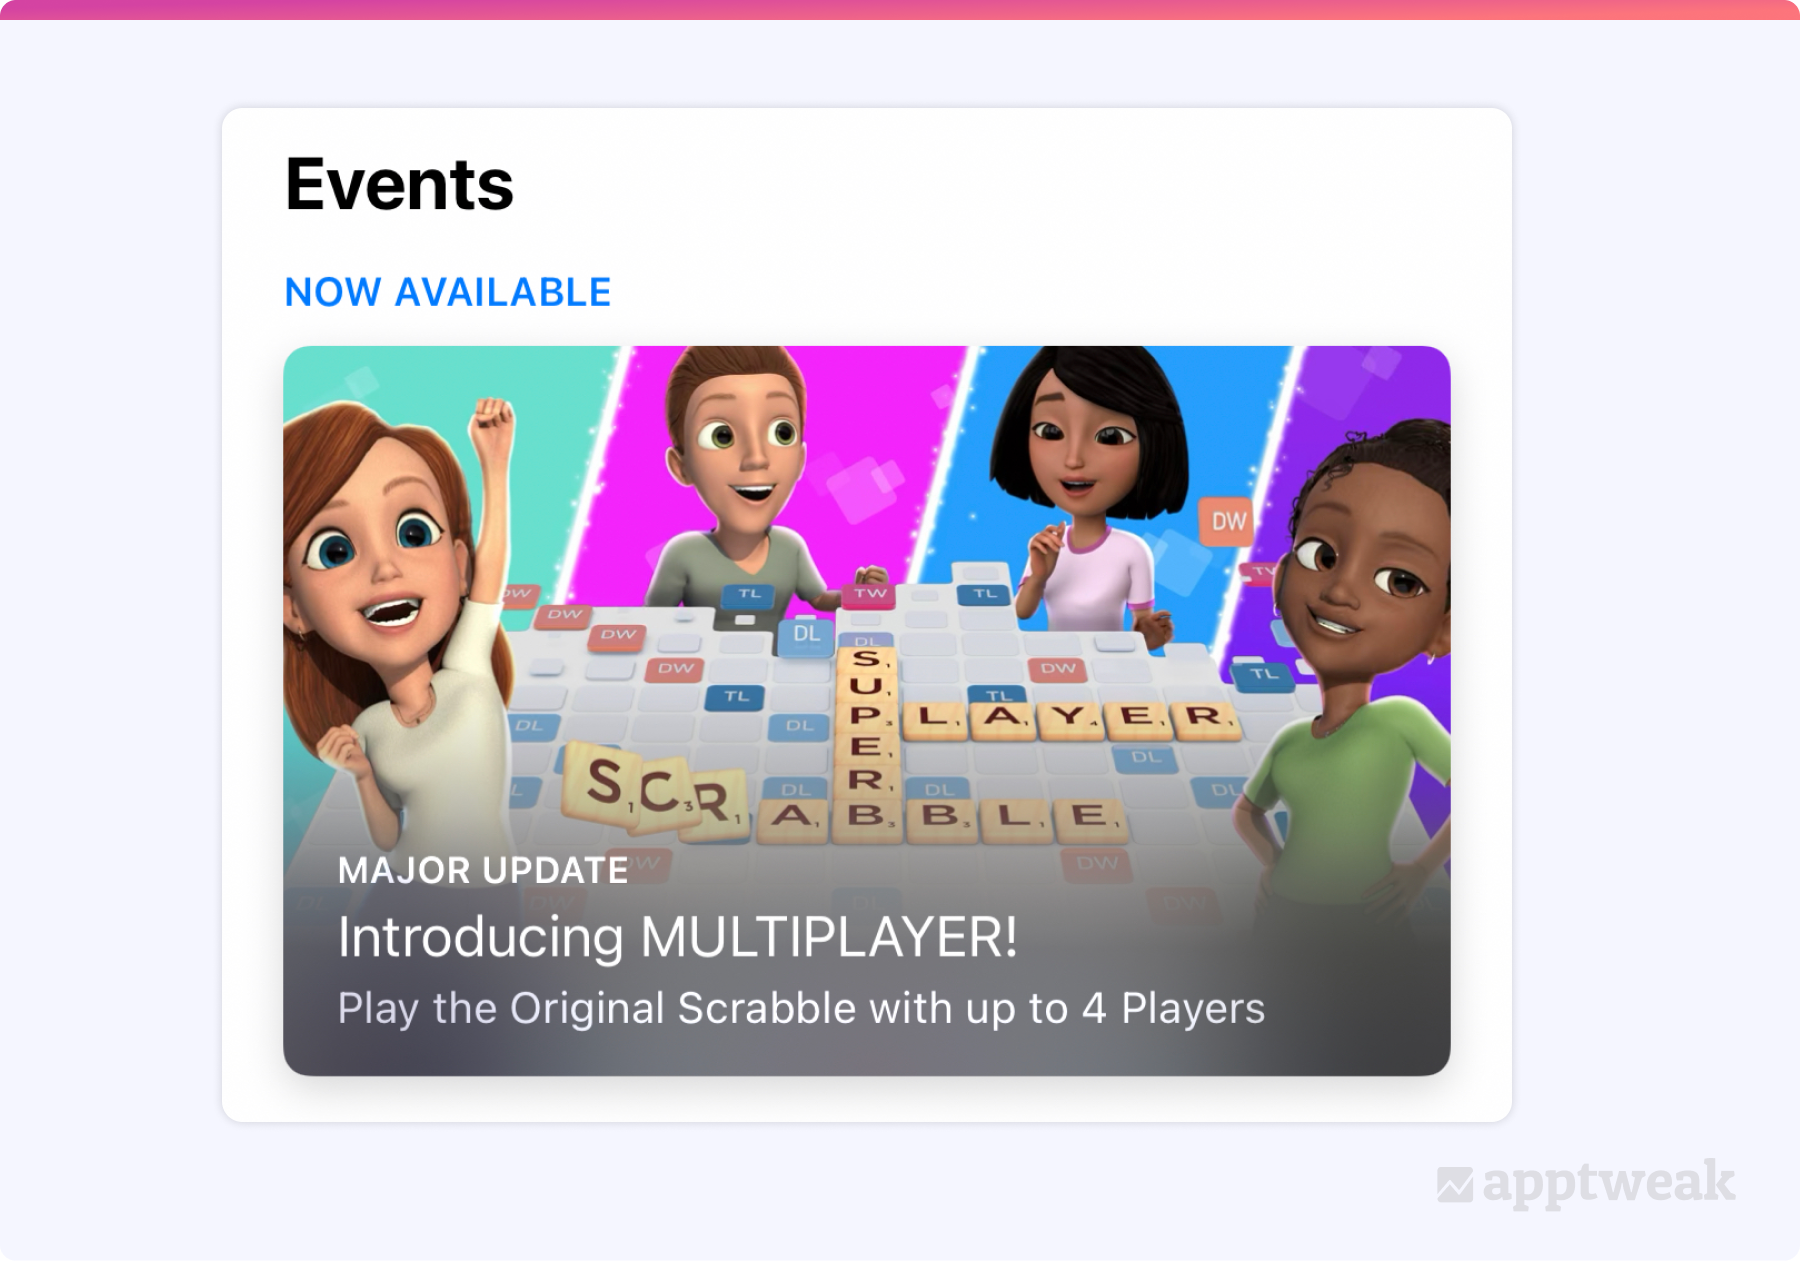 iOS 15 in app event for Scrabble Go on the App Store